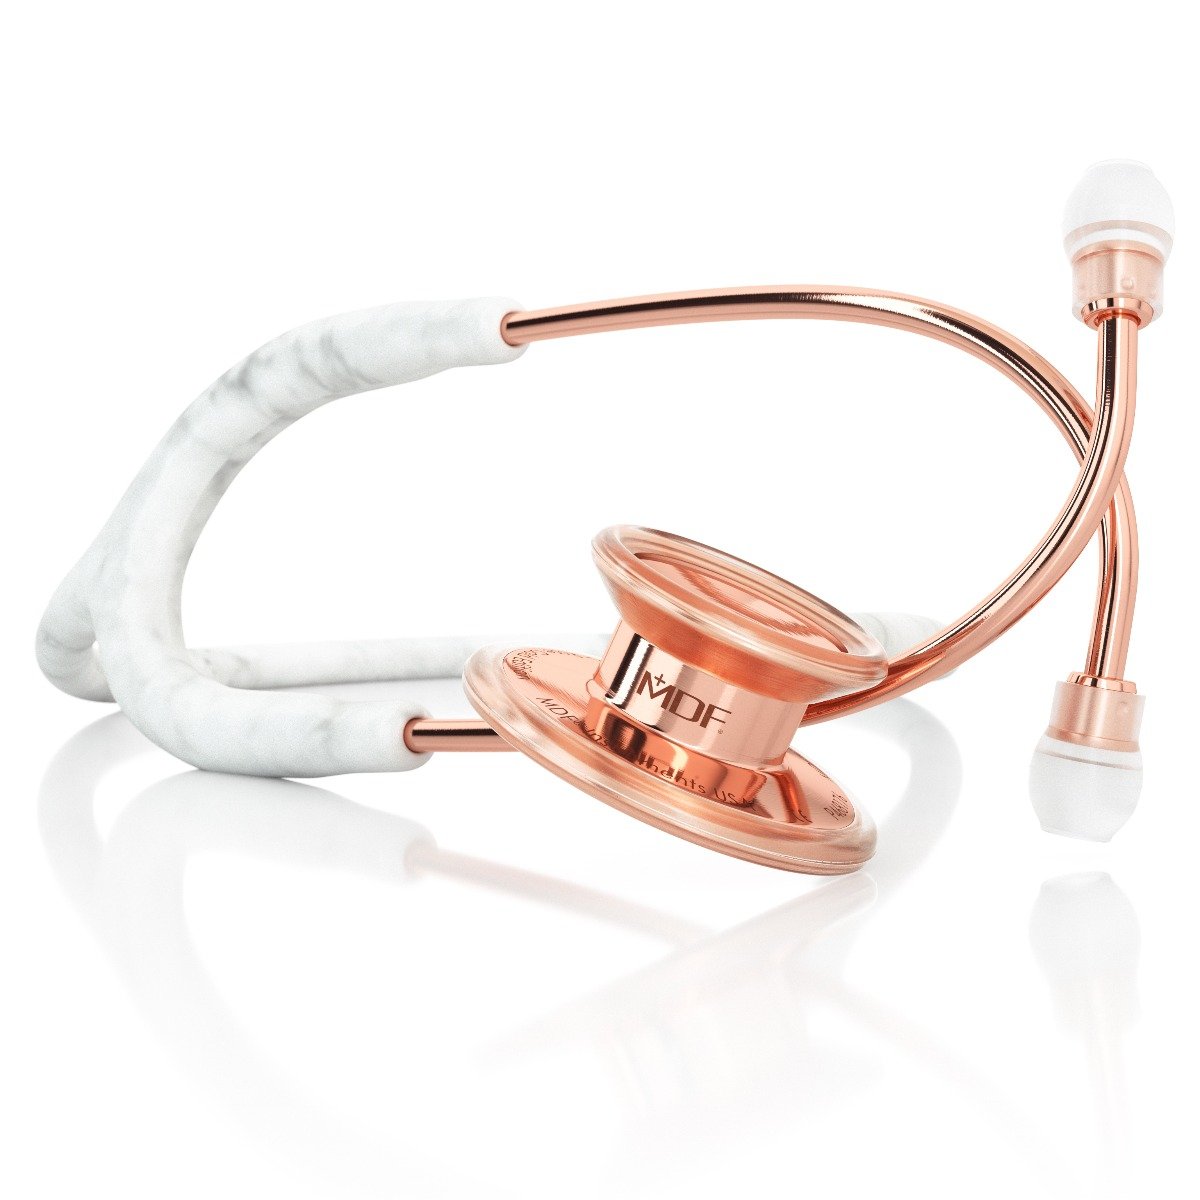 MDF® MD One® Stainless Steel Dual Head Stethoscope (MDF777) - Rose Gold and Marble